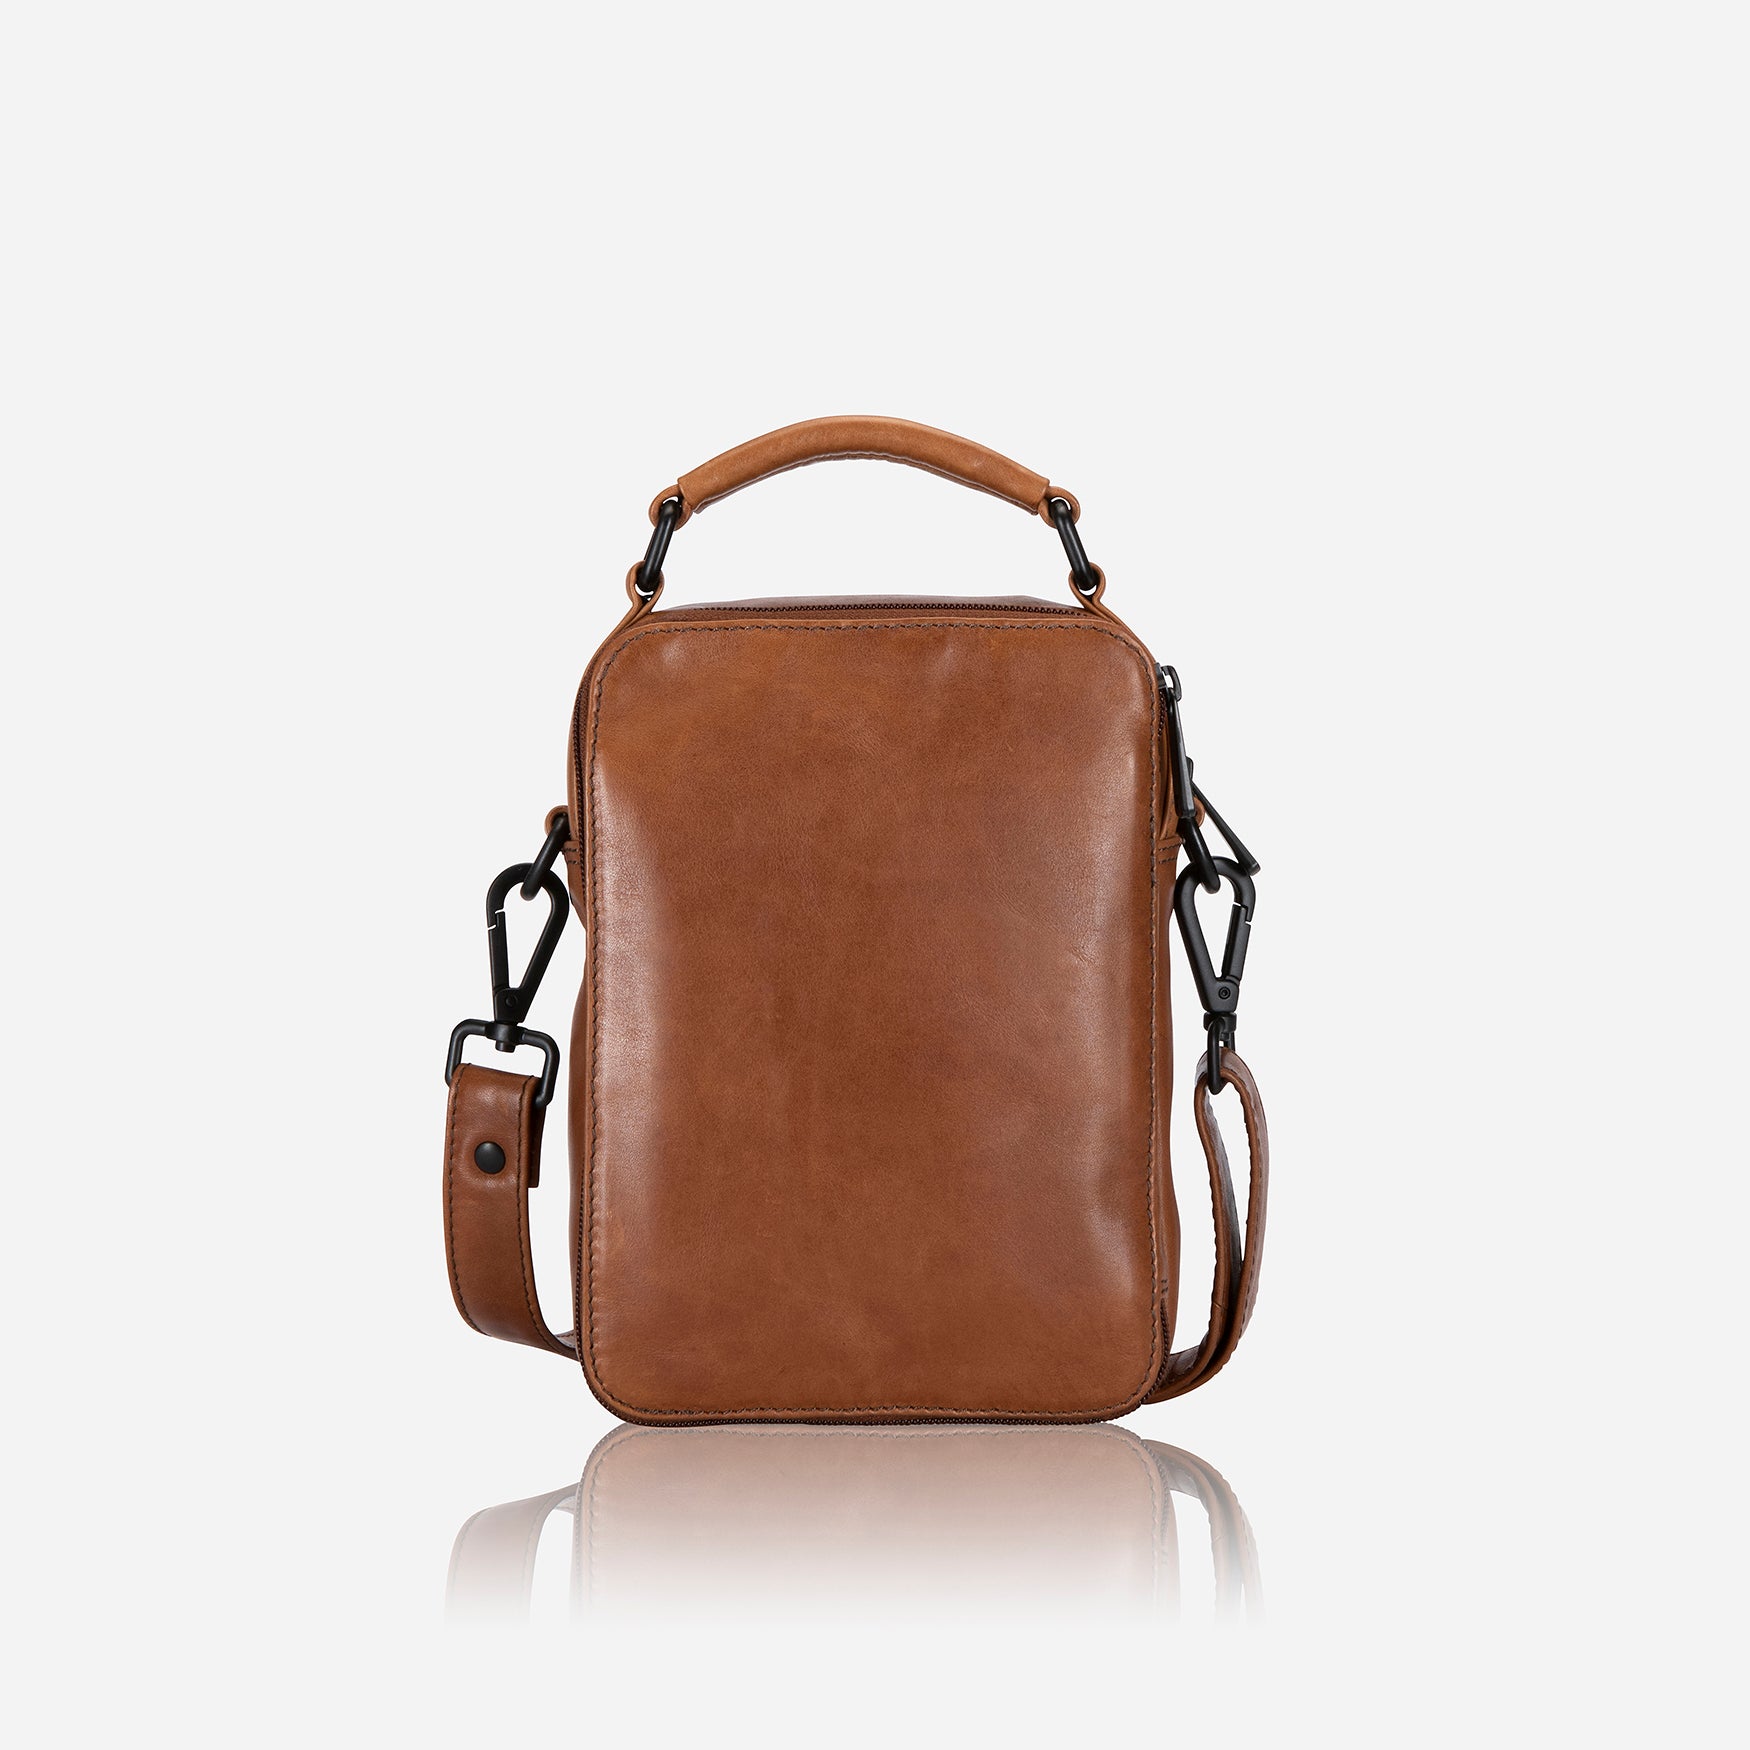 Gent's Leather Bag With Top Handle, Medium Brown